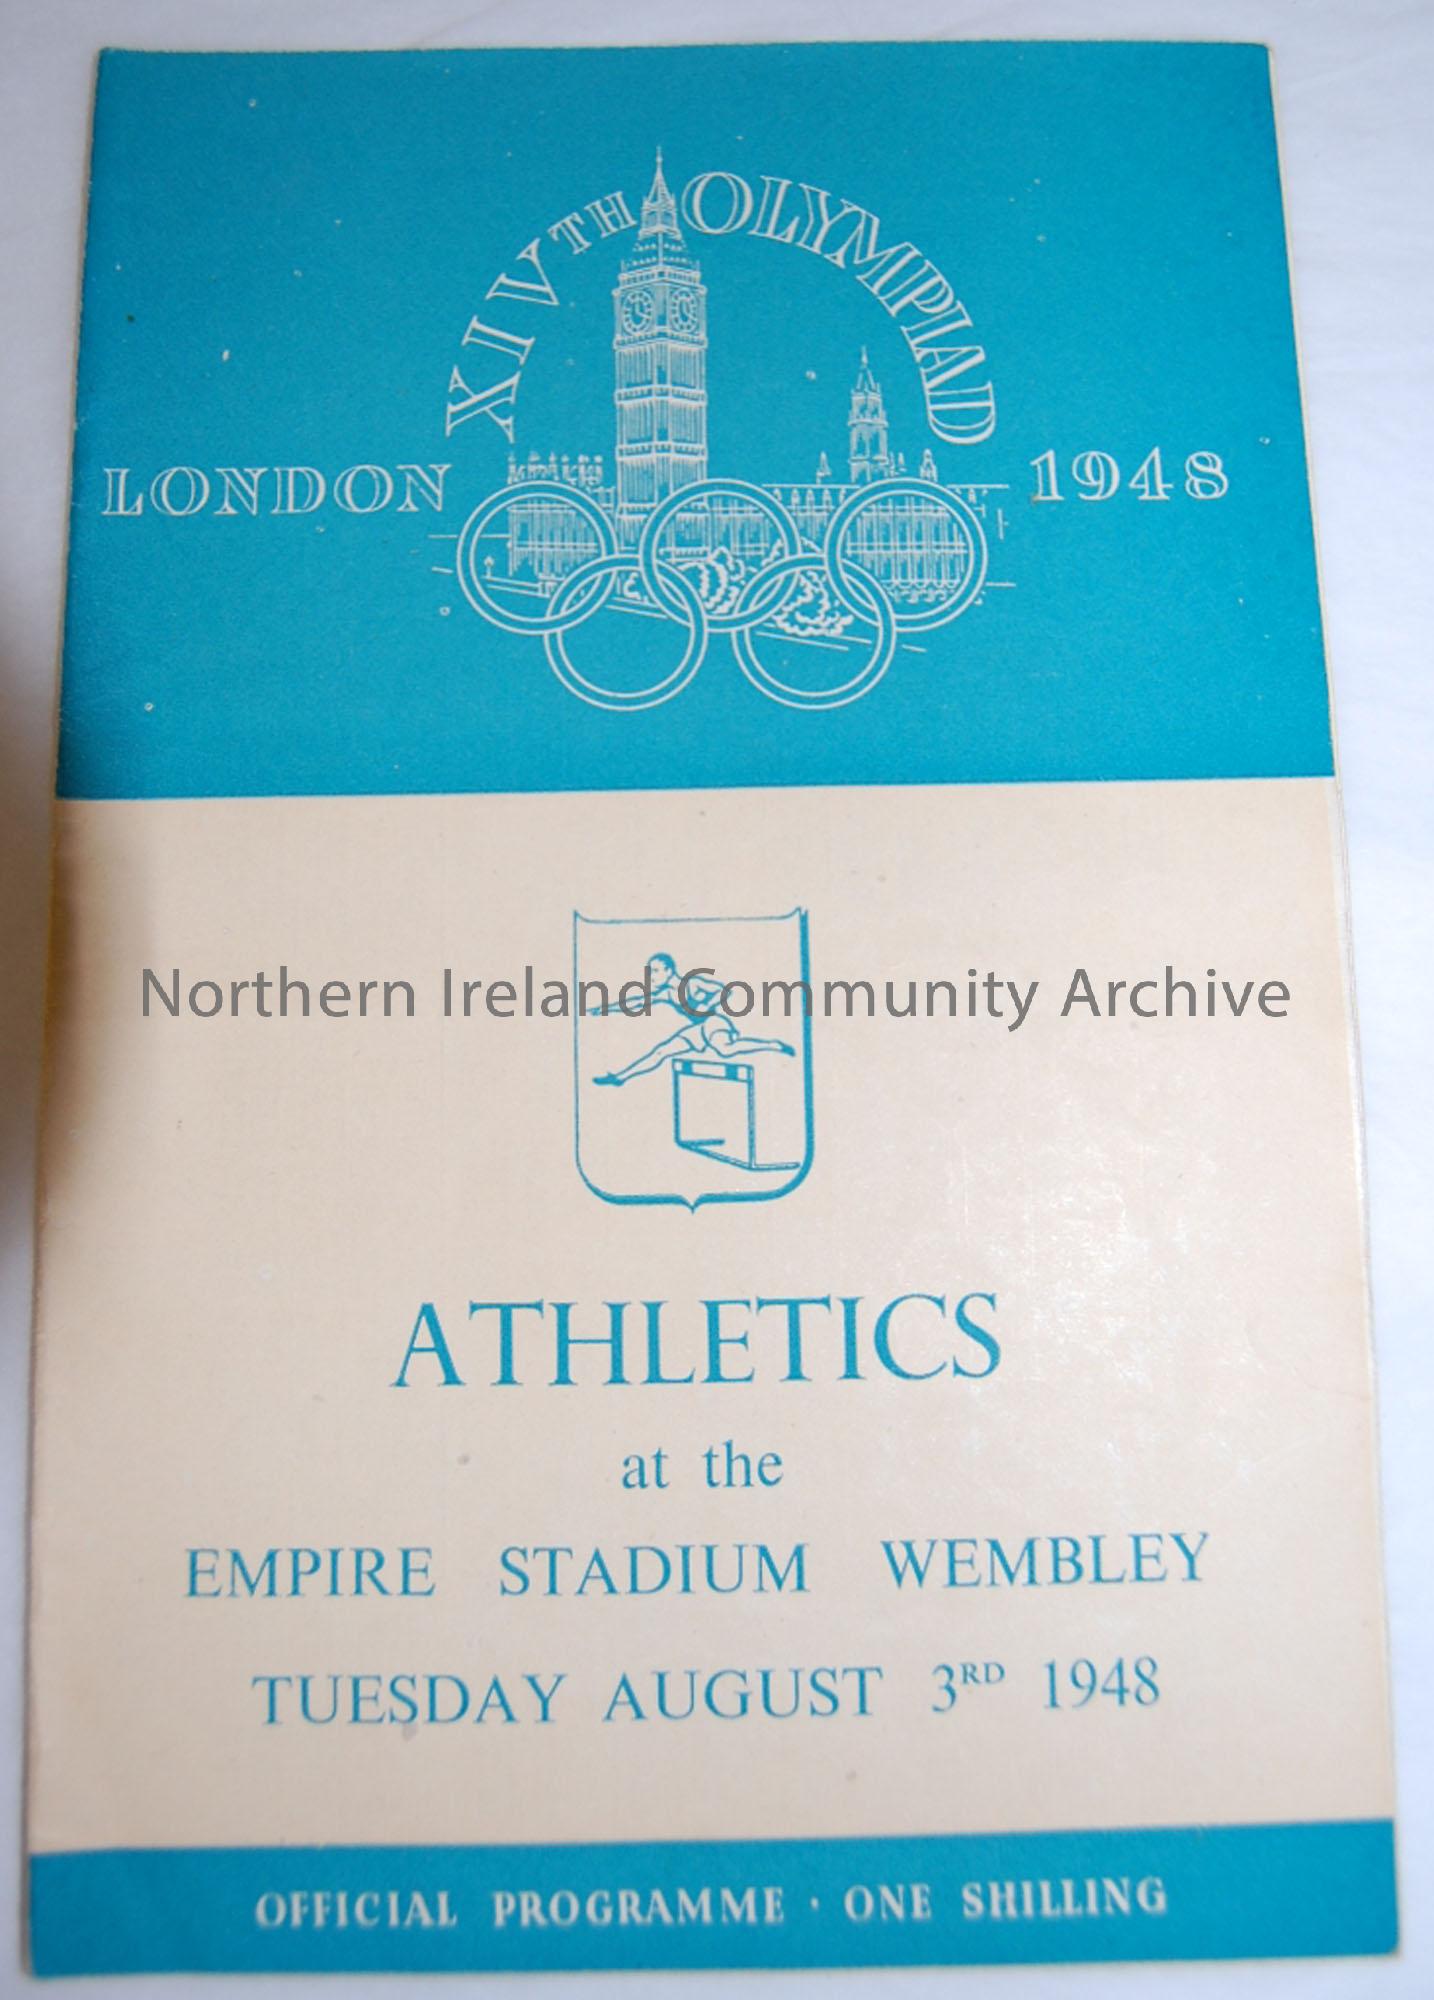 Athletics Programme from London Olympics, Empire Stadium Wembley, Tuesday August 3rd 1948. Illustrations include Olympic Rings and Houses of Parliamen…